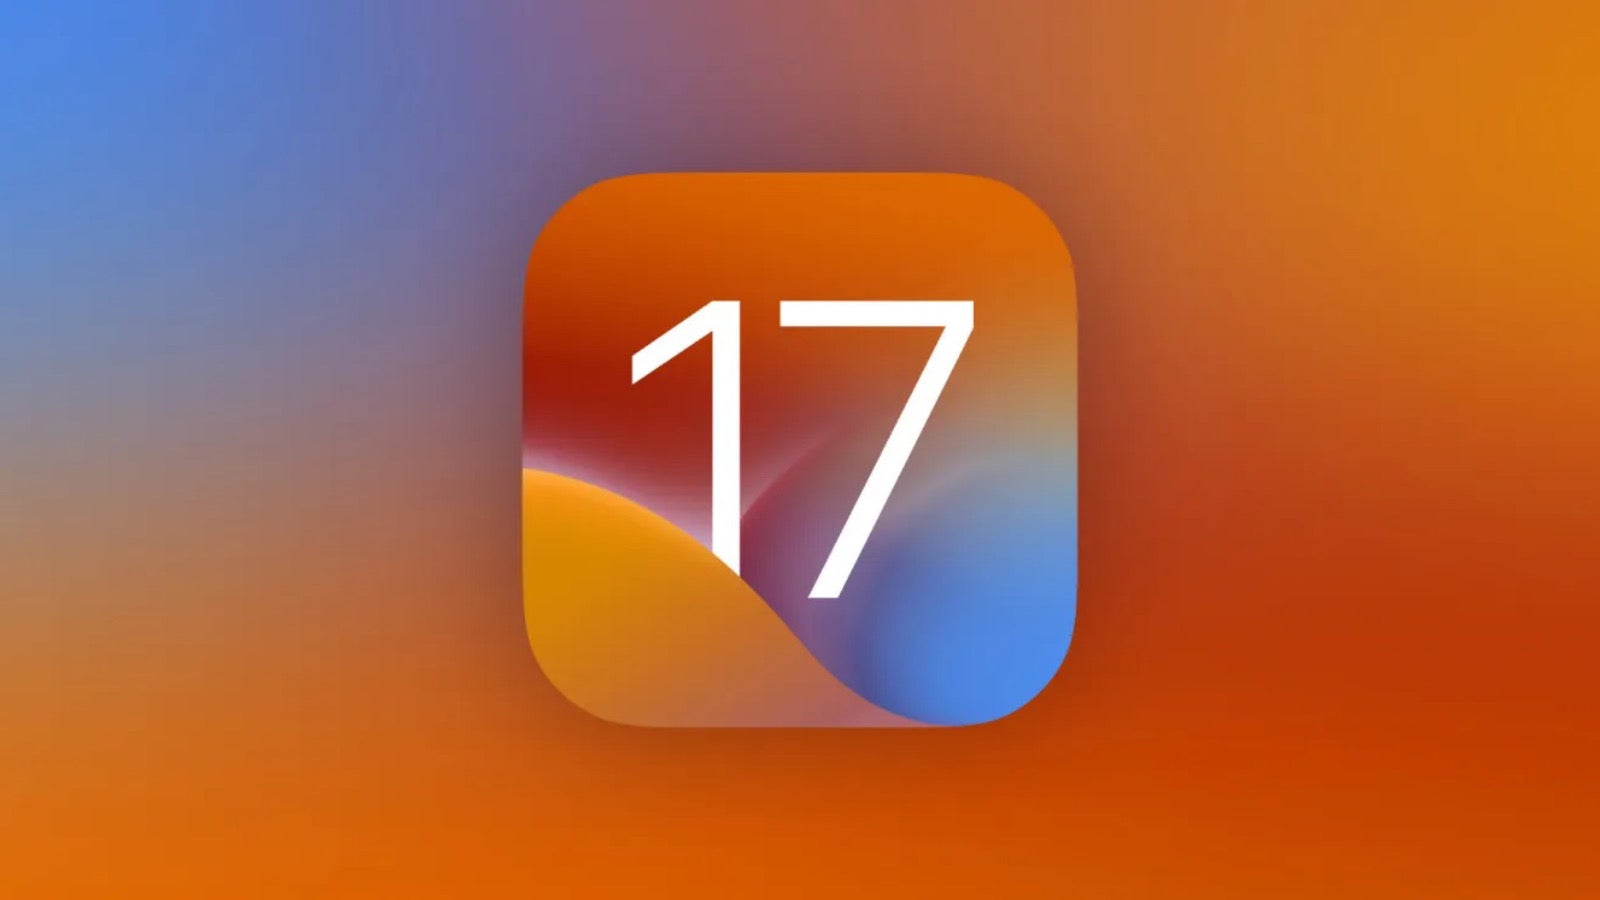 Exciting new iOS 17 features detailed in major new leak - Cybertechbiz.com